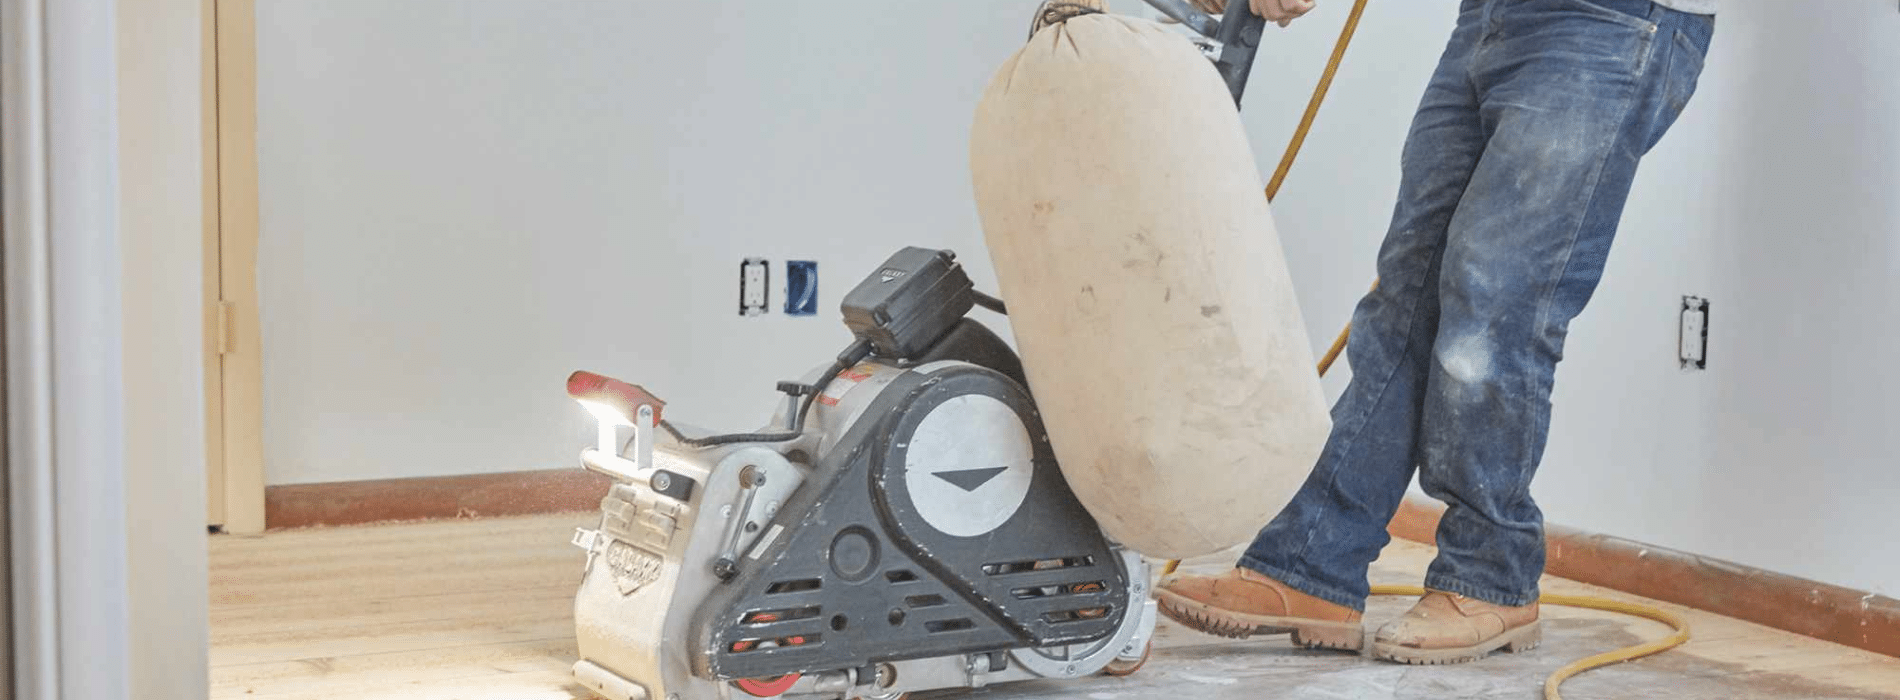 Mr Sander® use a Bona Scorpion drum sander with a dimension of 200mm, 1.5 kW effect, 240V voltage, and 50Hz frequency in Kilburn, NW6. This powerful equipment is connected to a dust extraction system with a HEPA filter, ensuring a clean and efficient sanding.